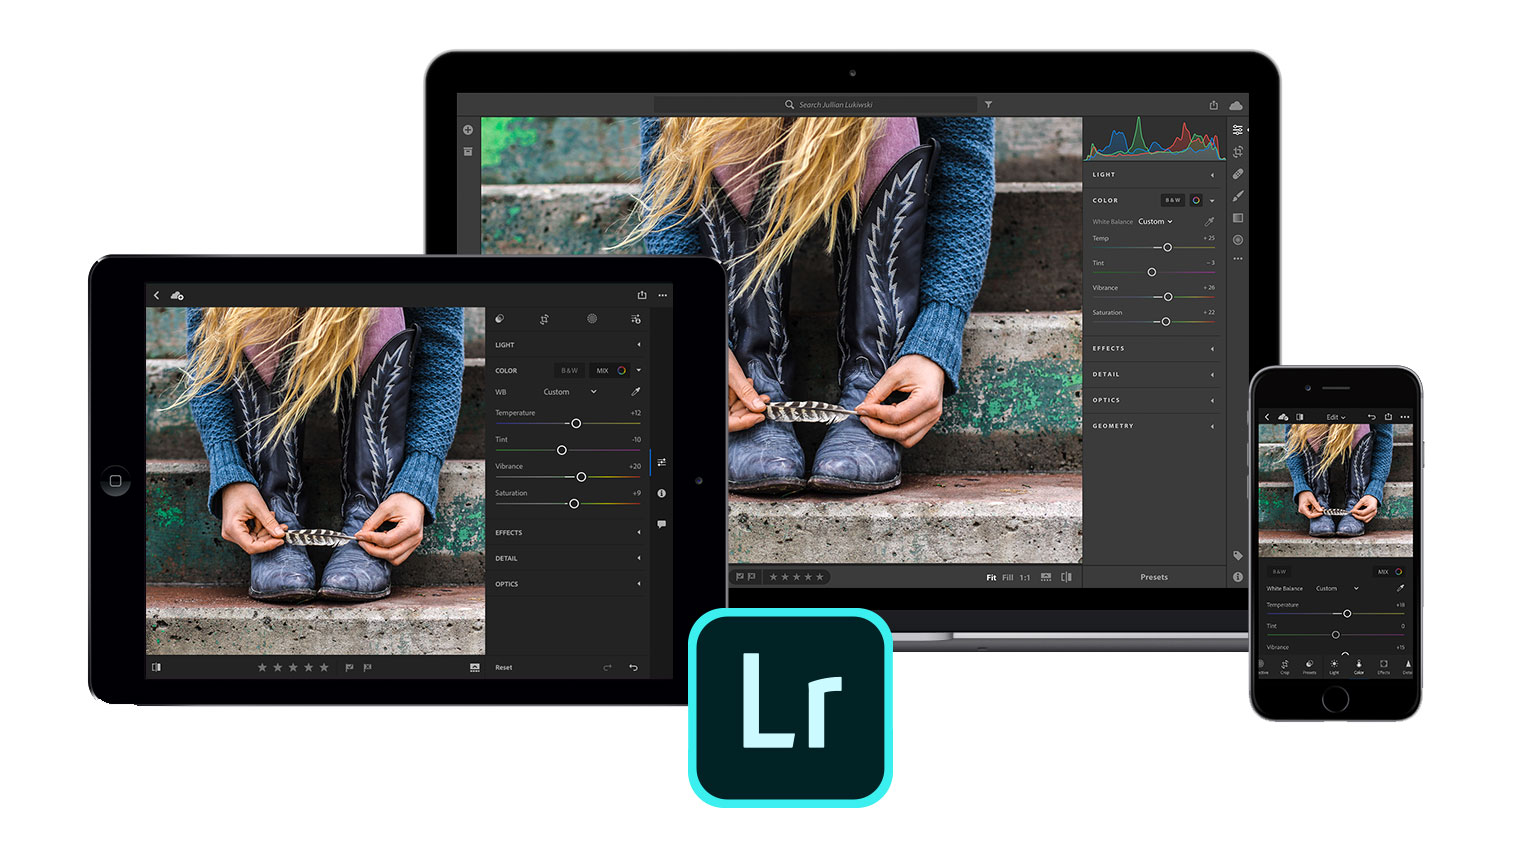 Adobe launches photography service Lightroom CC